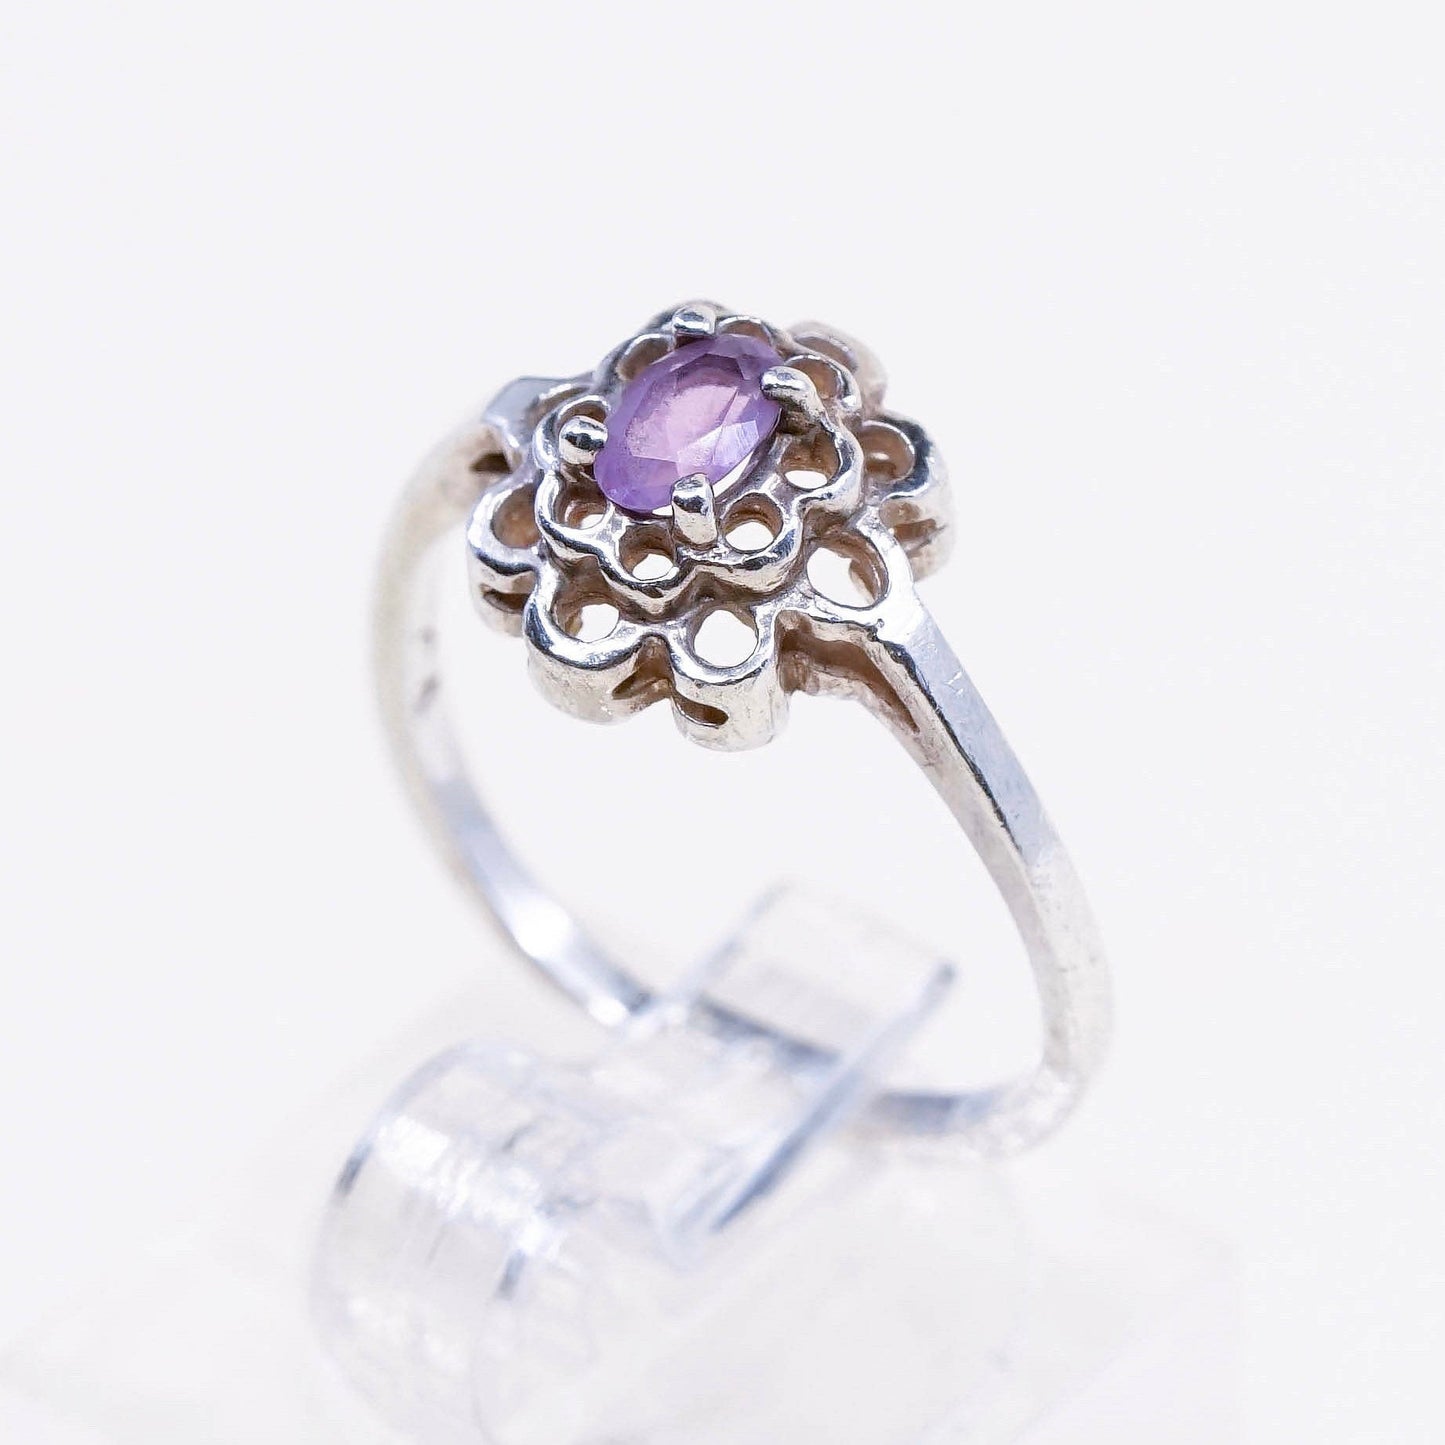 Size 6, vintage Sterling 925 silver handmade crown ring with amethyst